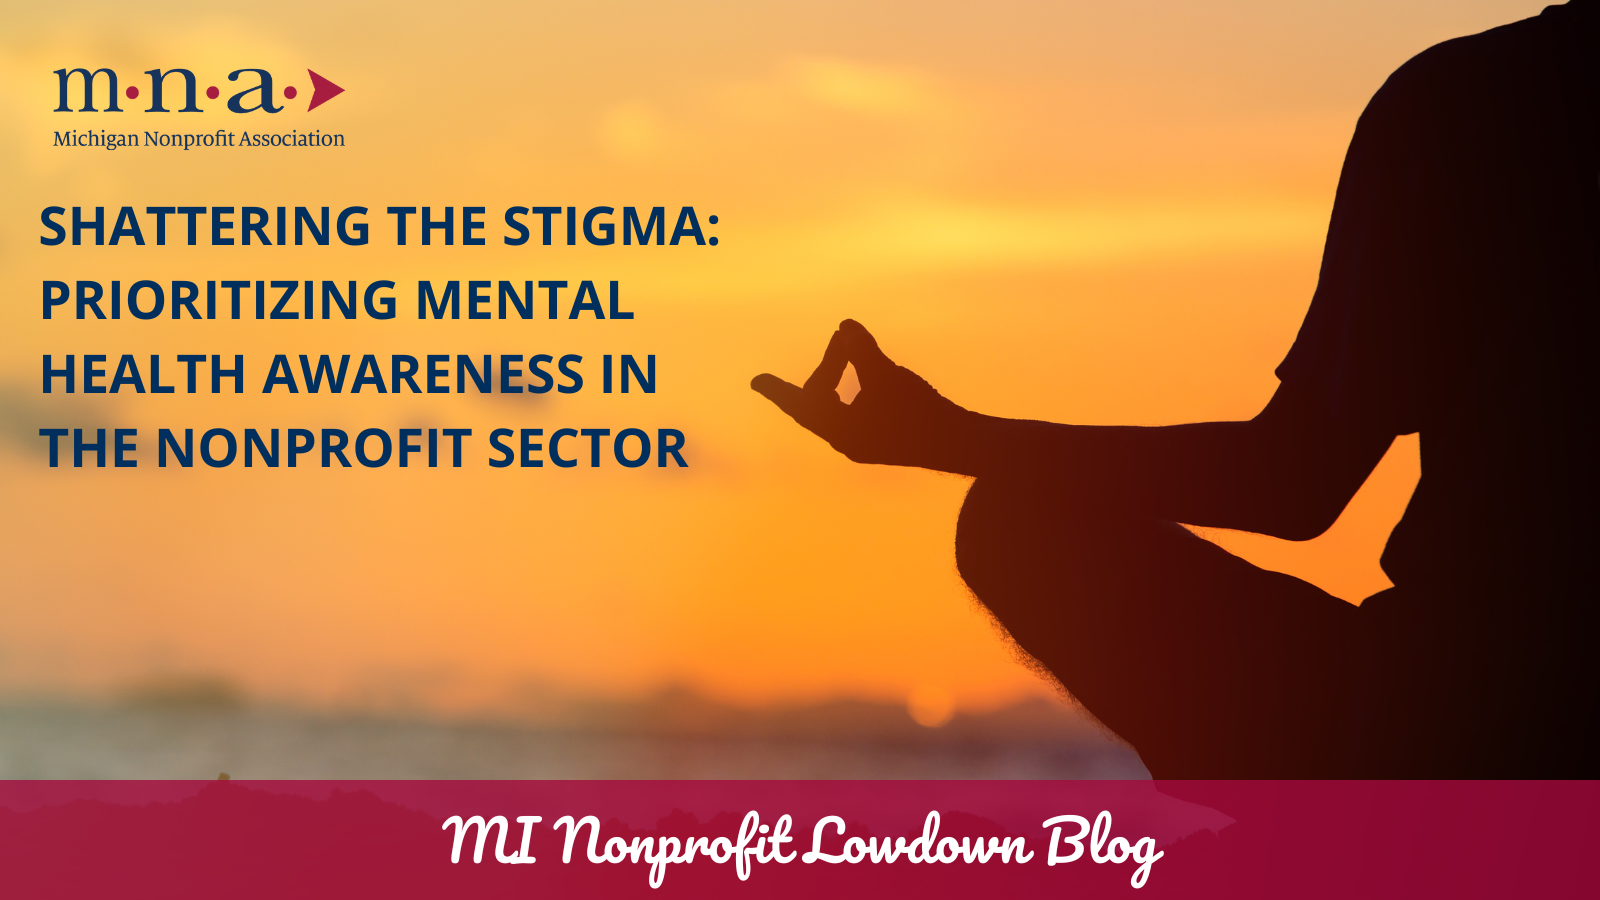 Shattering the Stigma: Prioritizing Mental Health Awareness in the Nonprofit Sector